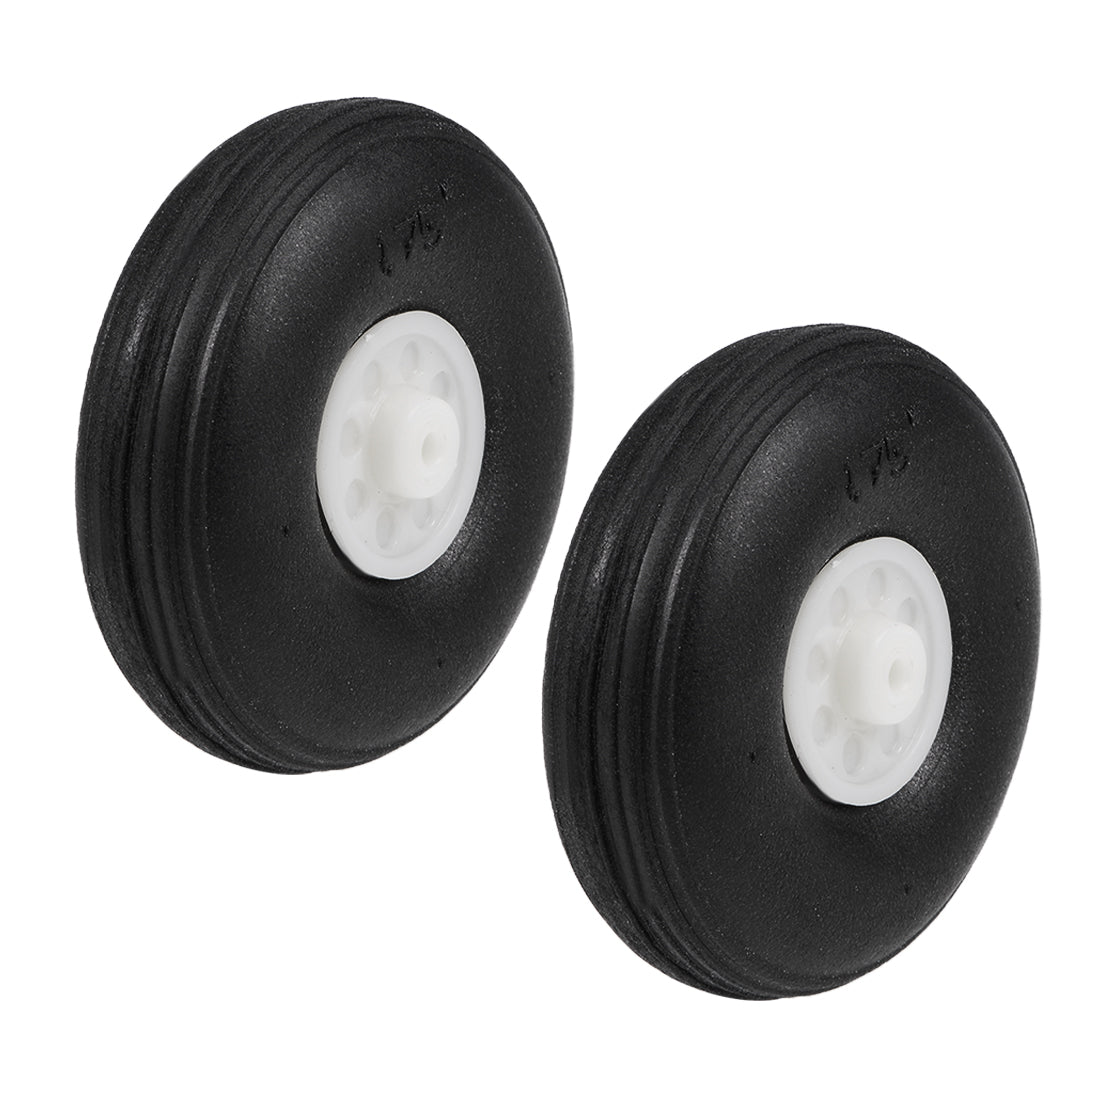 uxcell Uxcell Tire and Wheel Sets for RC Airplane,PU Sponge Tire with Plastic Hub,1.75" 2pcs